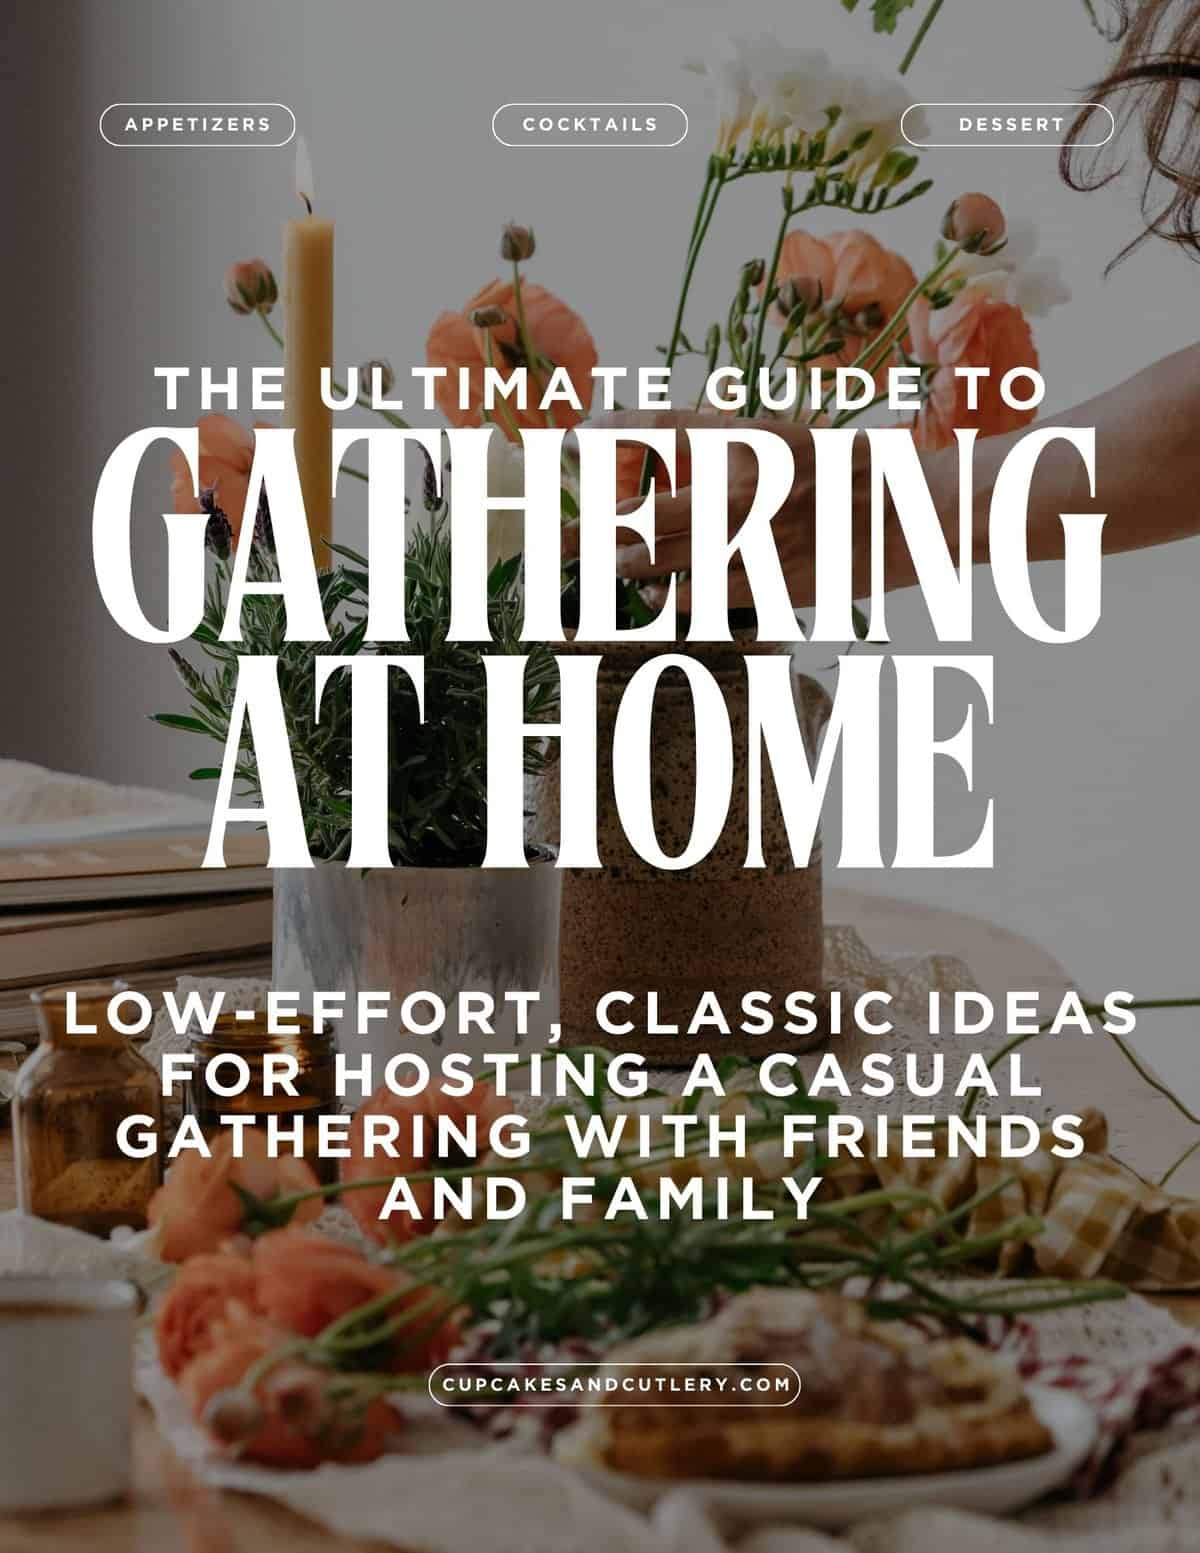 Text: Gathering at Home as the cover page of a digital guide for entertaining at home.